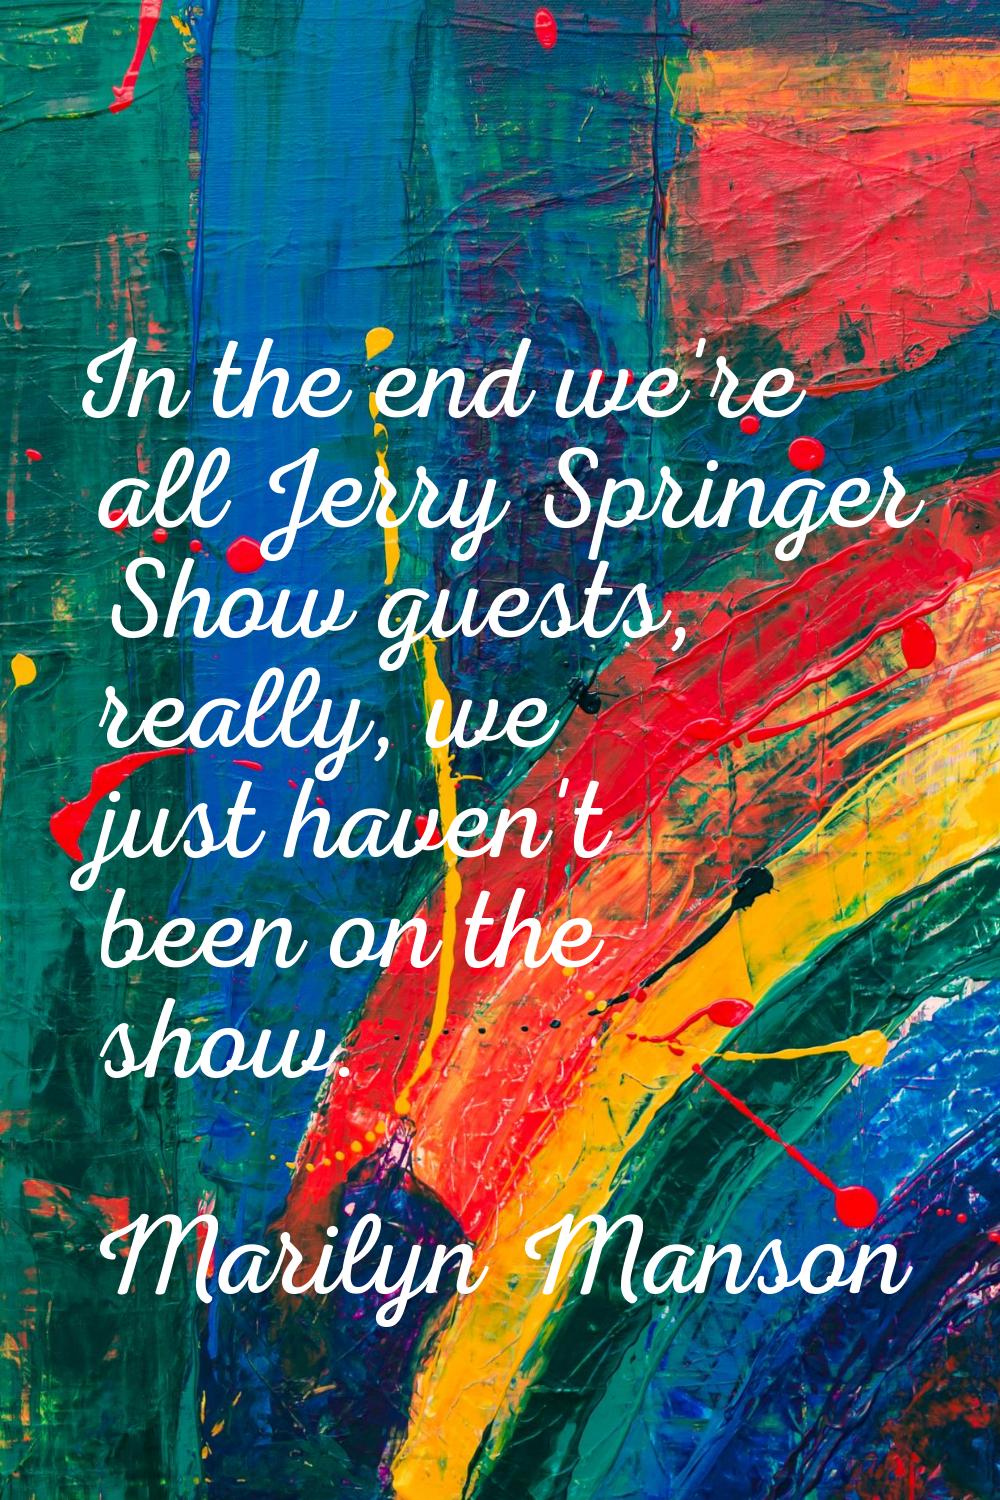 In the end we're all Jerry Springer Show guests, really, we just haven't been on the show.